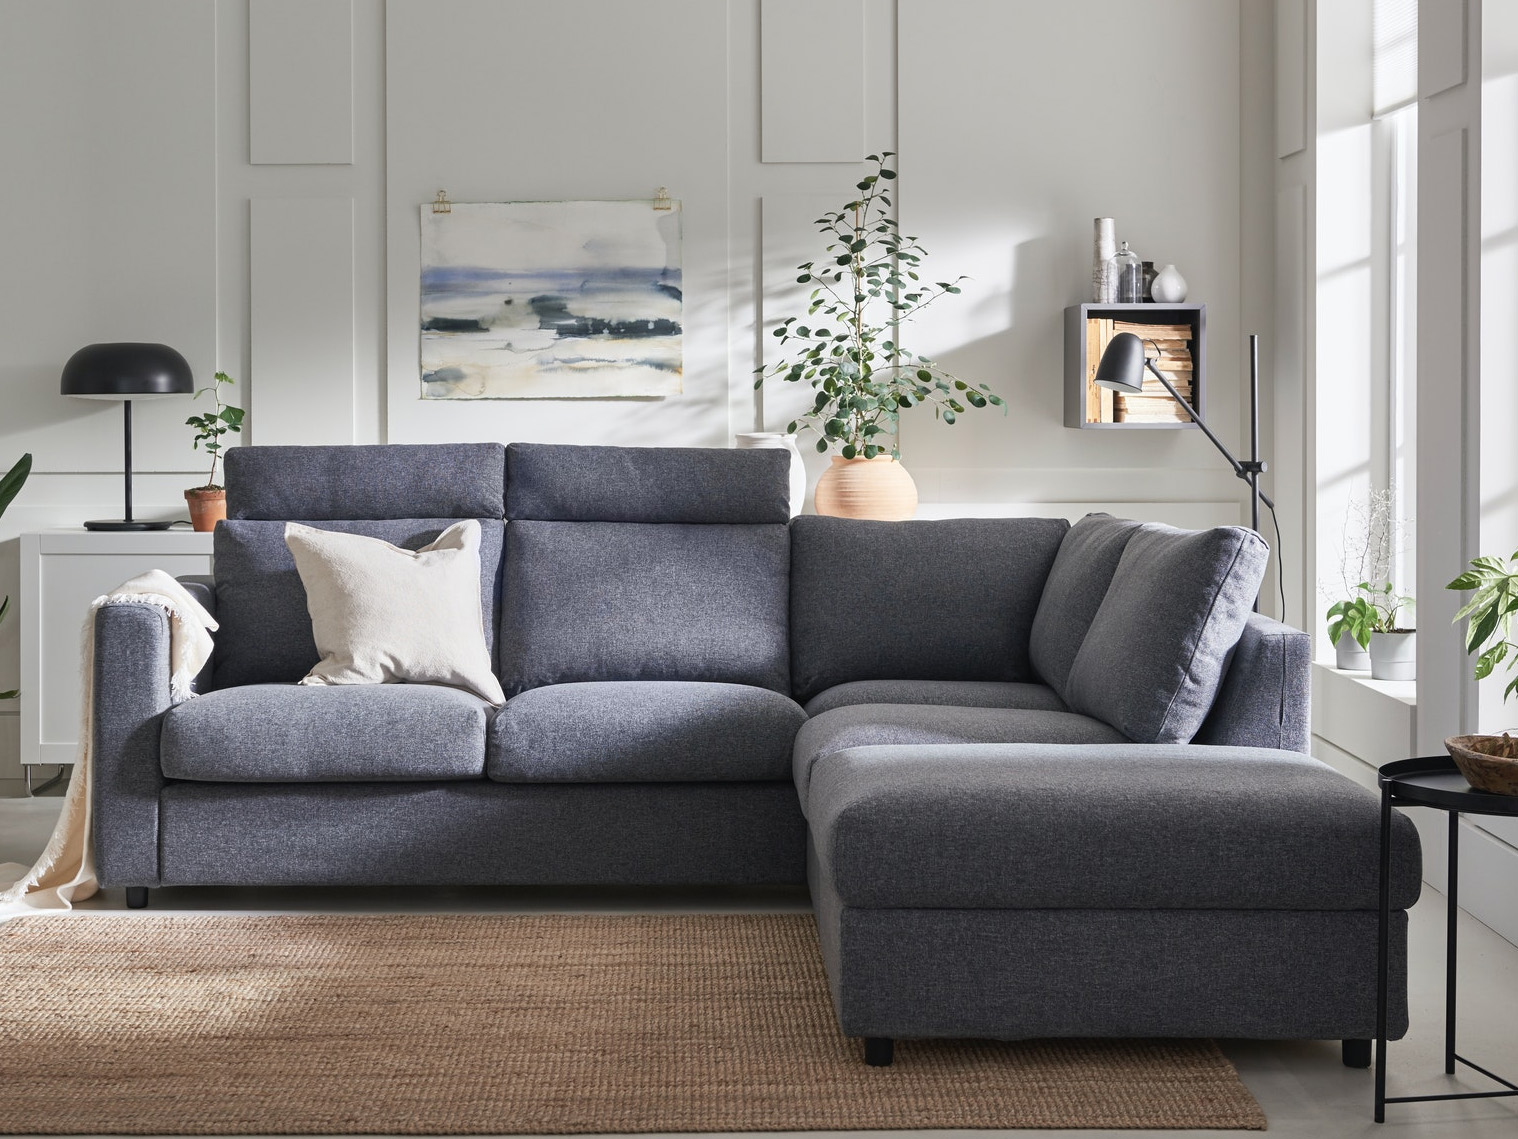  Sofas  Sofa  Beds Couches  IKEA  Sofa  designed for comfort